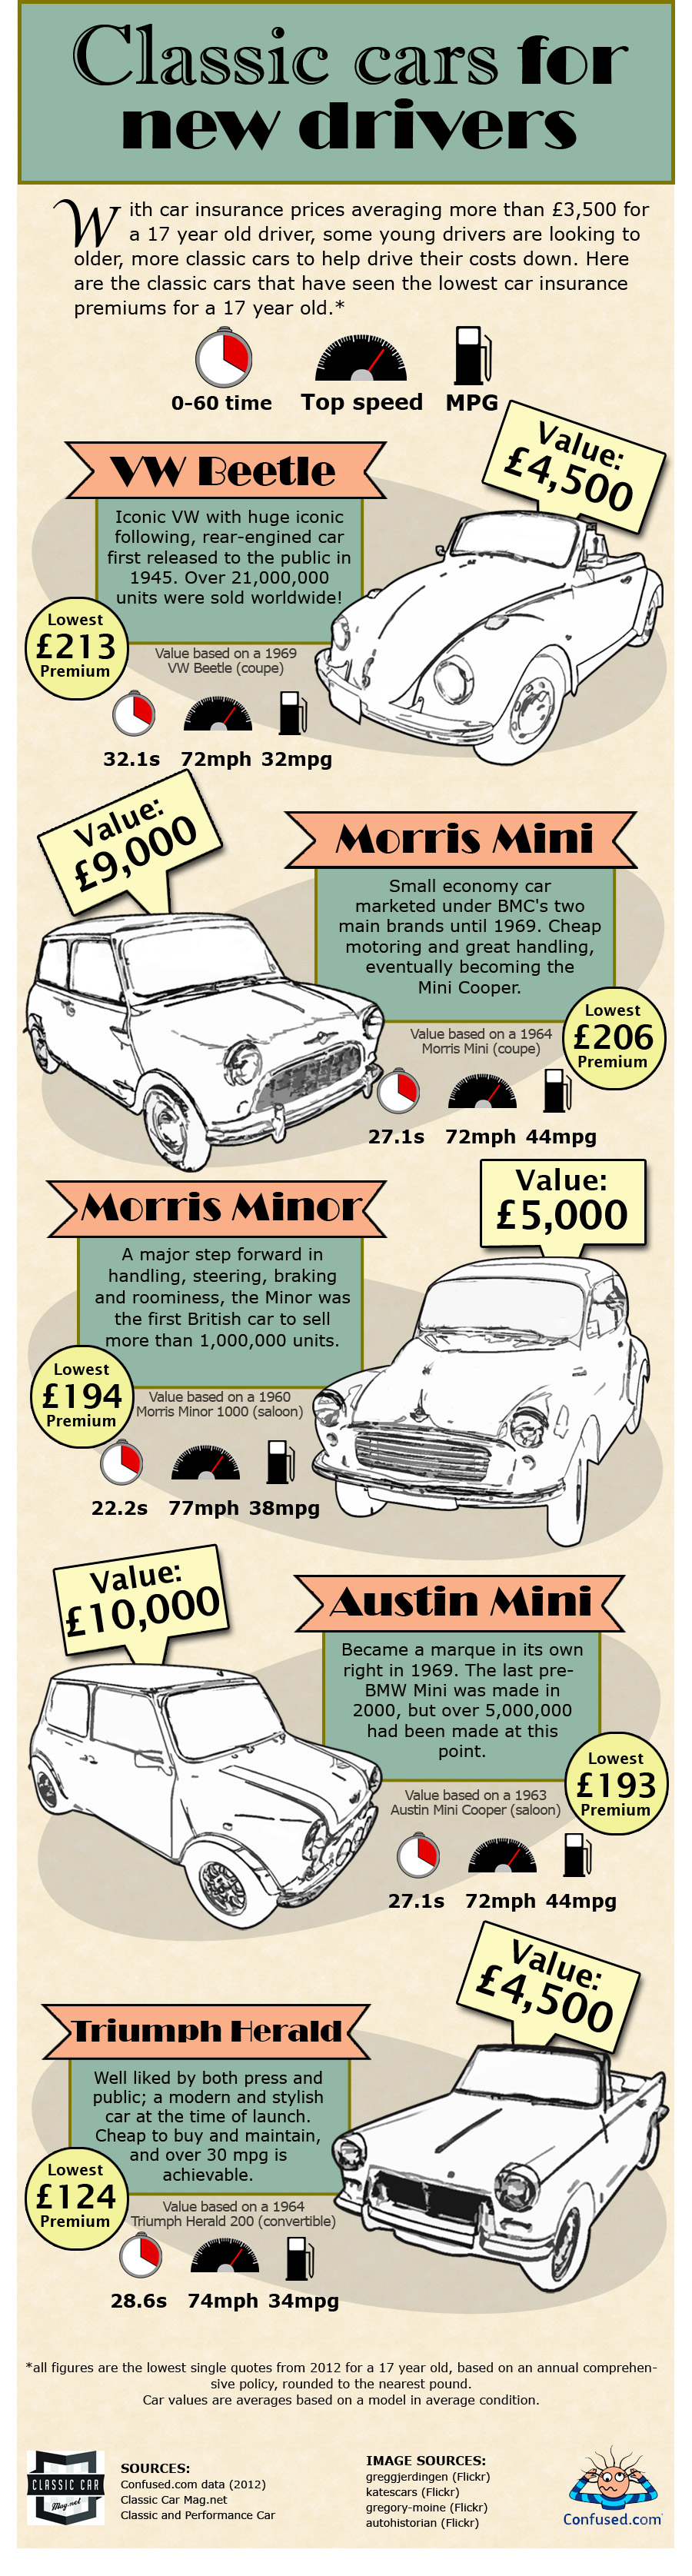 classic-cars-young-drivers-infographic